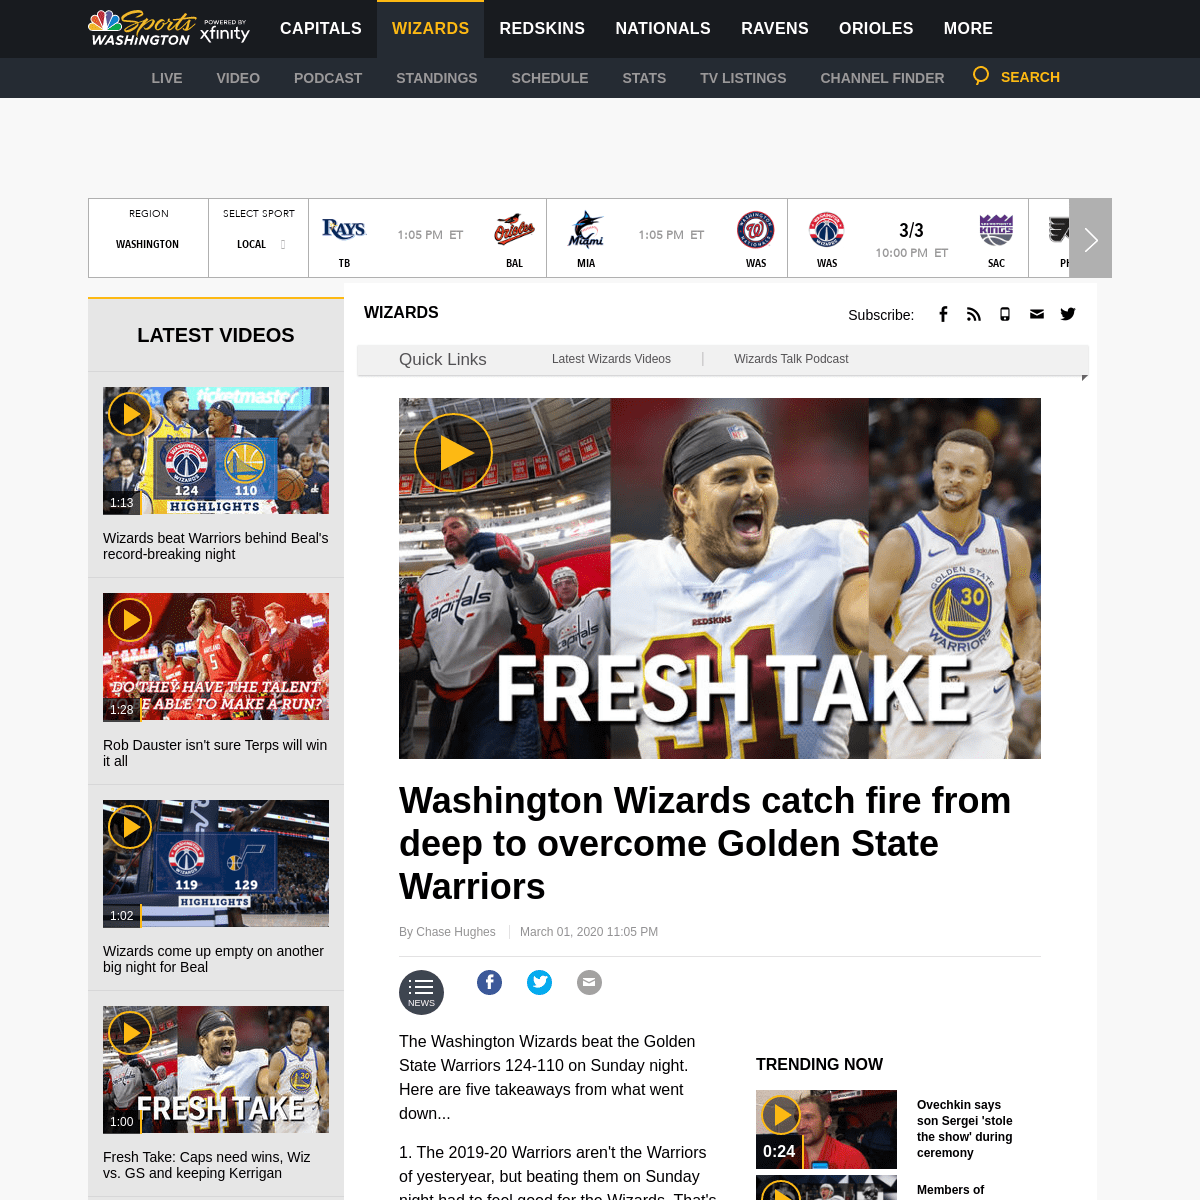 A complete backup of www.nbcsports.com/washington/wizards/washington-wizards-catch-fire-deep-overcome-golden-state-warriors